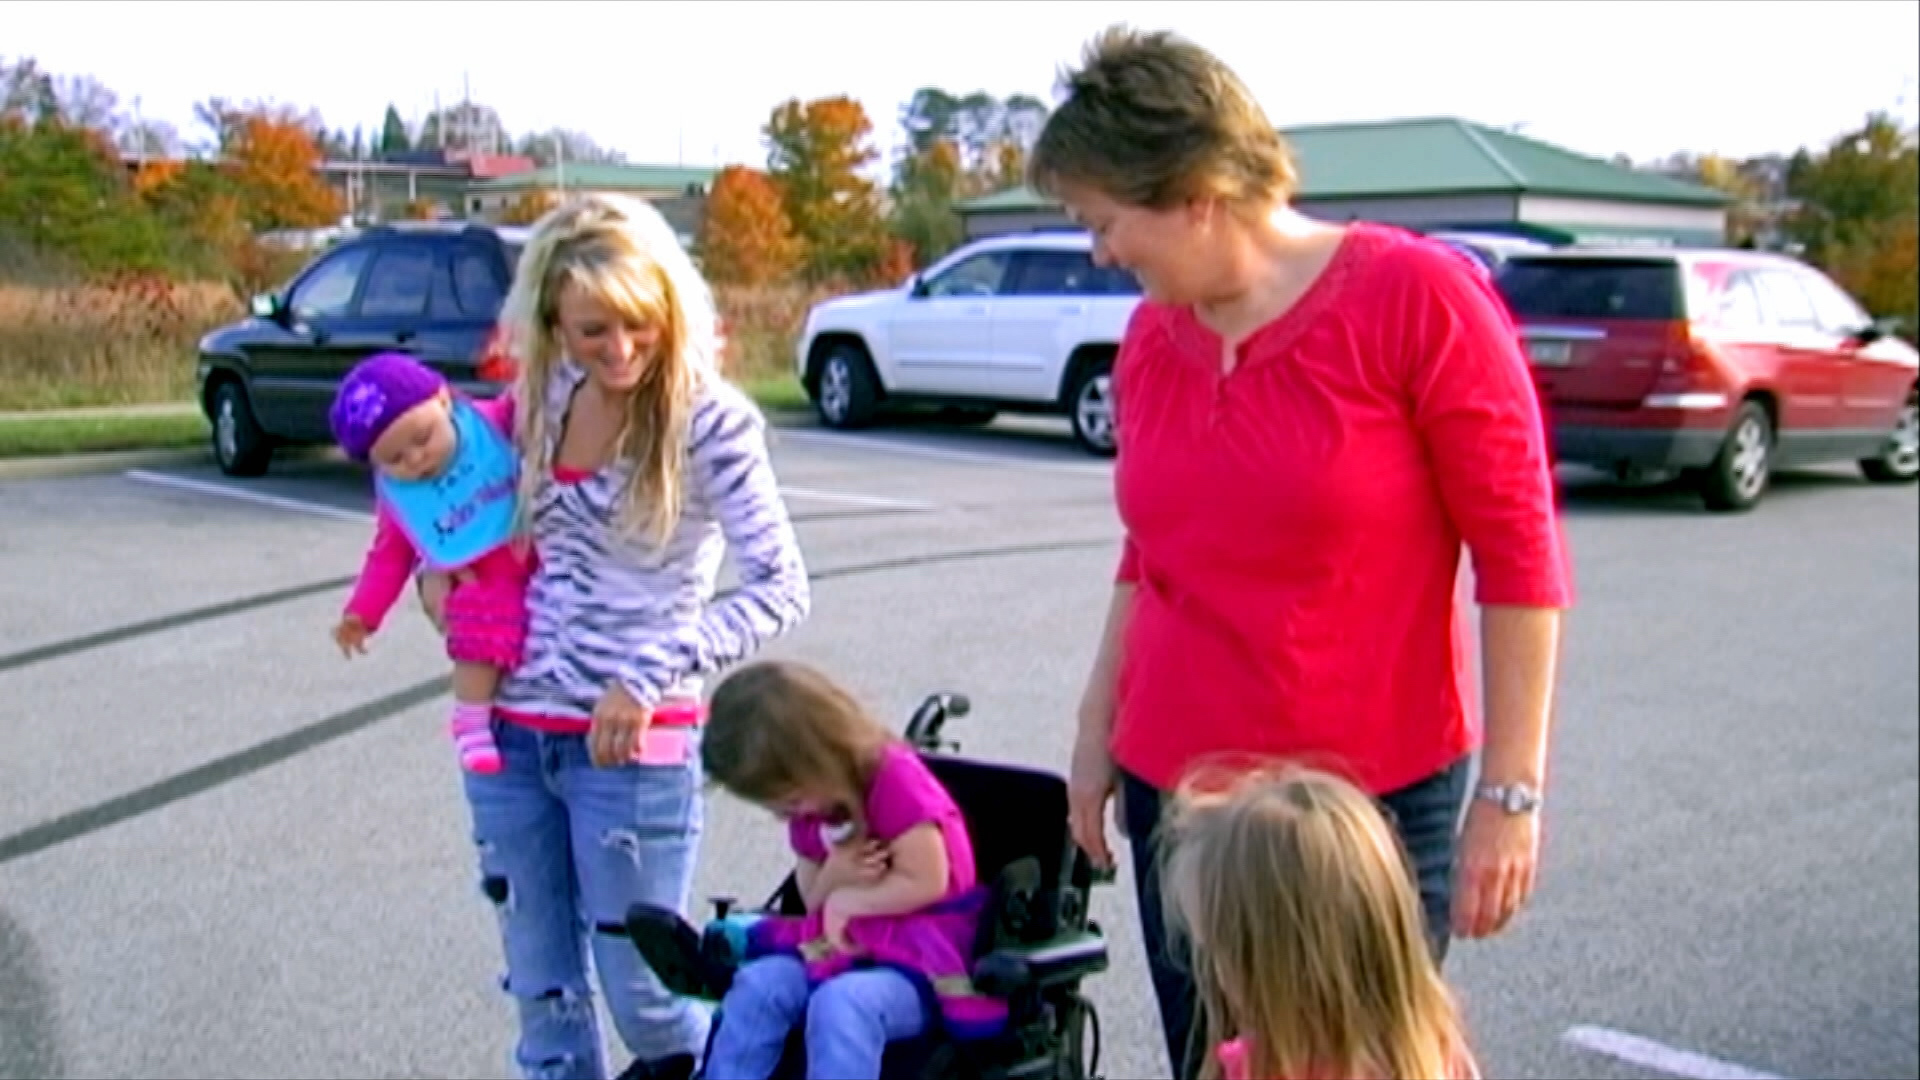 Watch Teen Mom 2 Season 5 Episode 11 Out Of The Blue Full Show On Paramount Plus